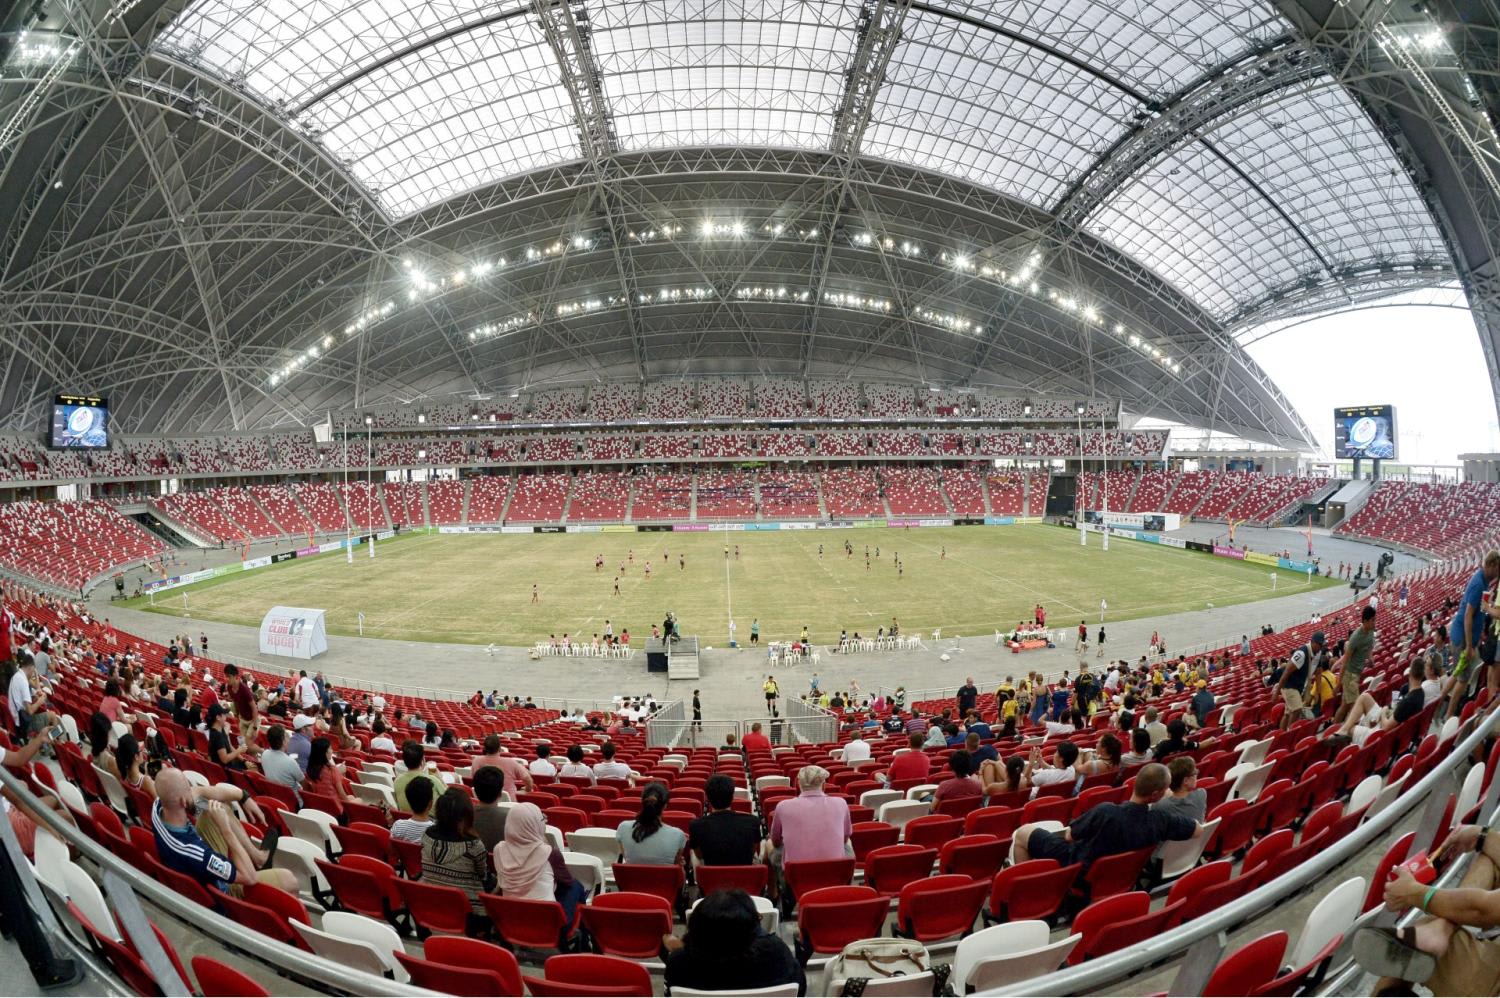 Spectators watching an international rugby tournament at the National Stadium within Singapore Sports Hub in Kallang, after it opened in June 2014.